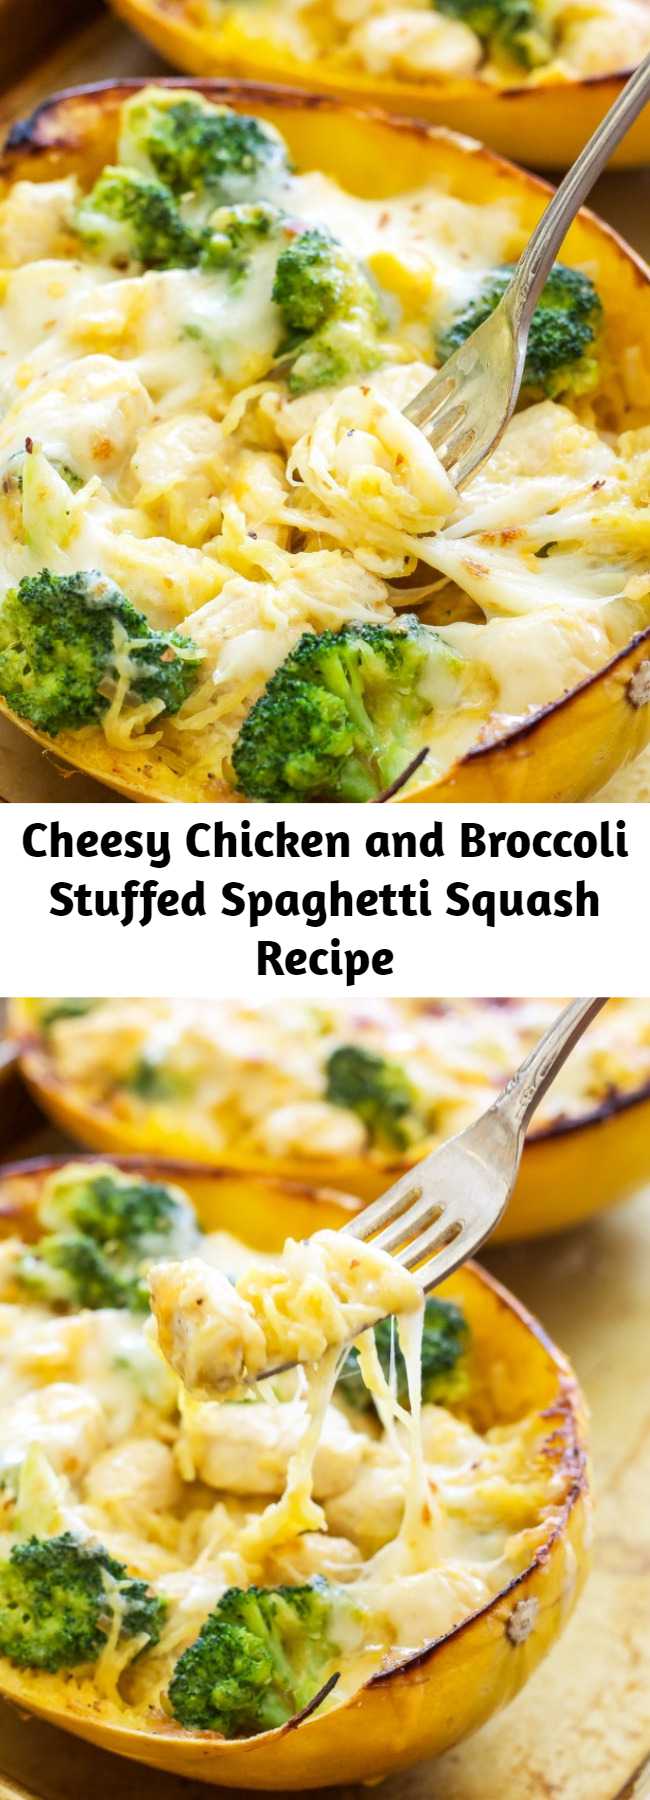 Cheesy Chicken and Broccoli Stuffed Spaghetti Squash Recipe - Spaghetti Squash stuffed with a creamy, cheesy, chicken and broccoli filling and topped with more melted cheese! This Cheesy Chicken and Broccoli Stuffed Spaghetti Squash makes a great gluten free, low carb comfort food dinner!